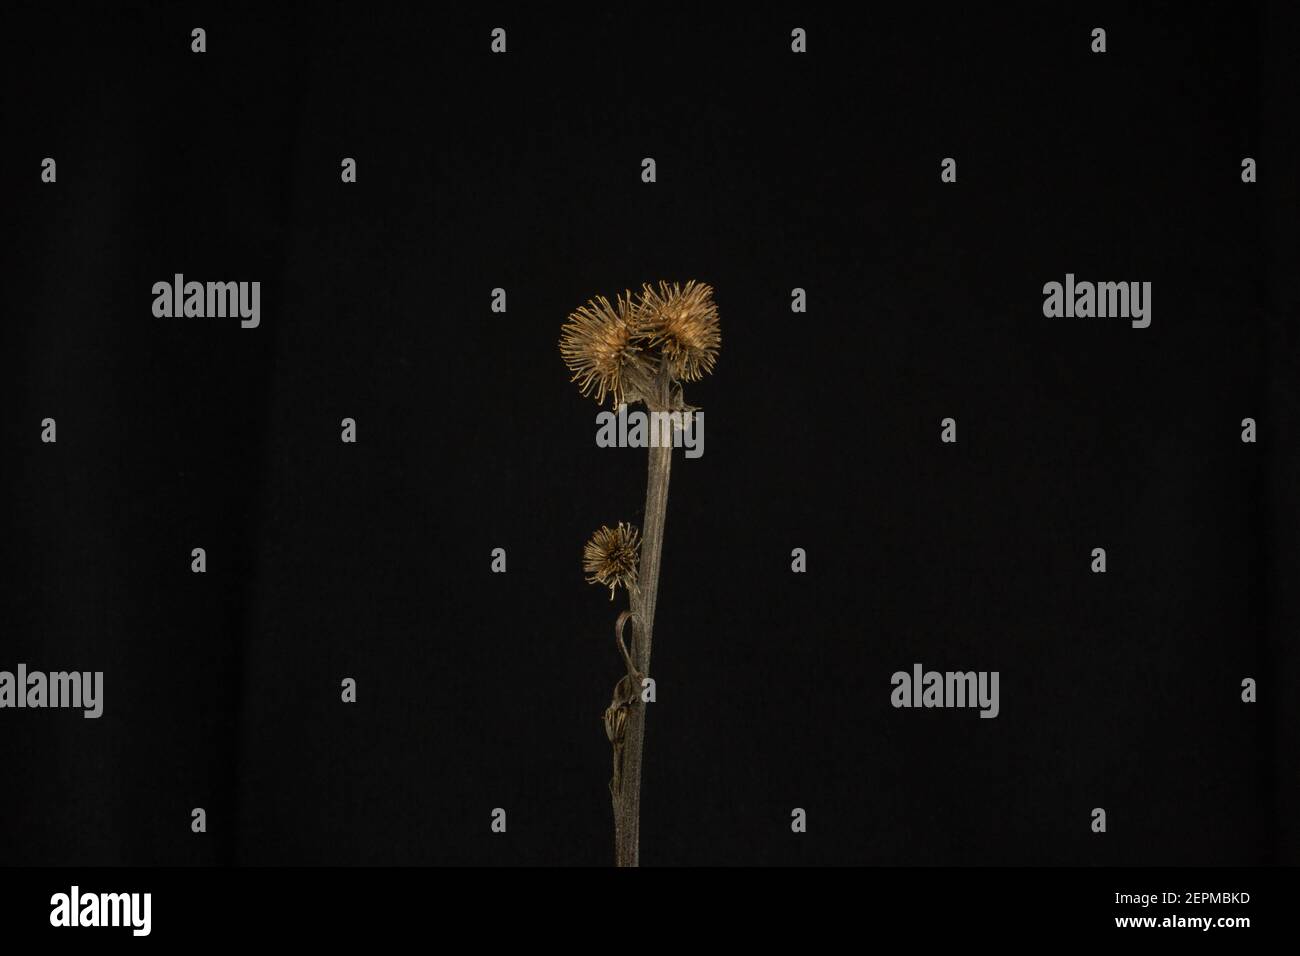 minimalist common Burdock seed heads isolated  with white light on a black background Stock Photo